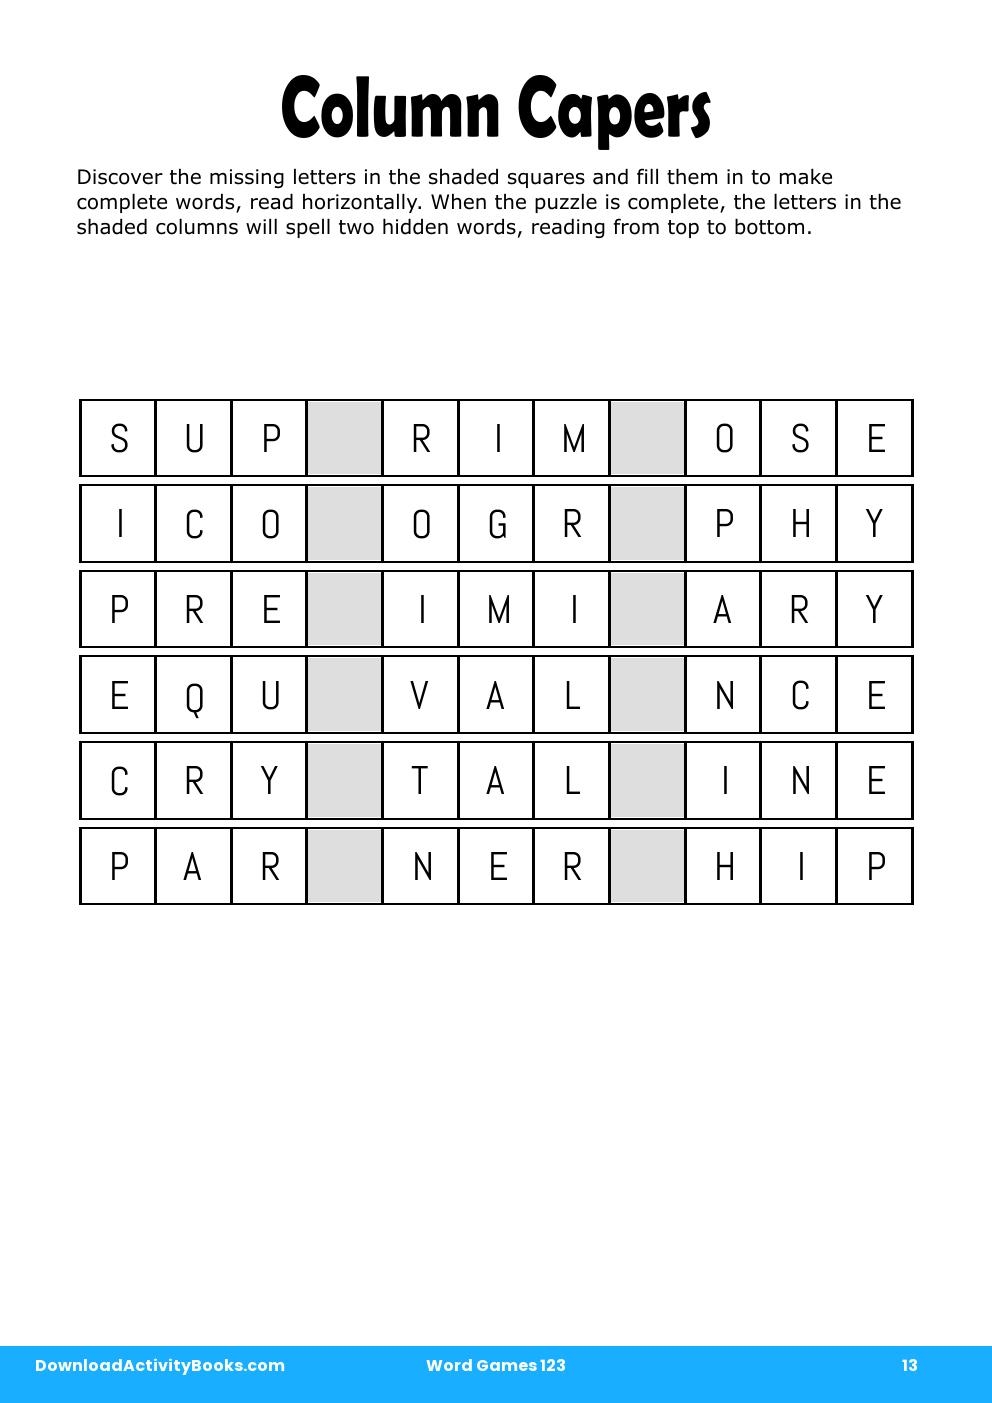 Column Capers in Word Games 123